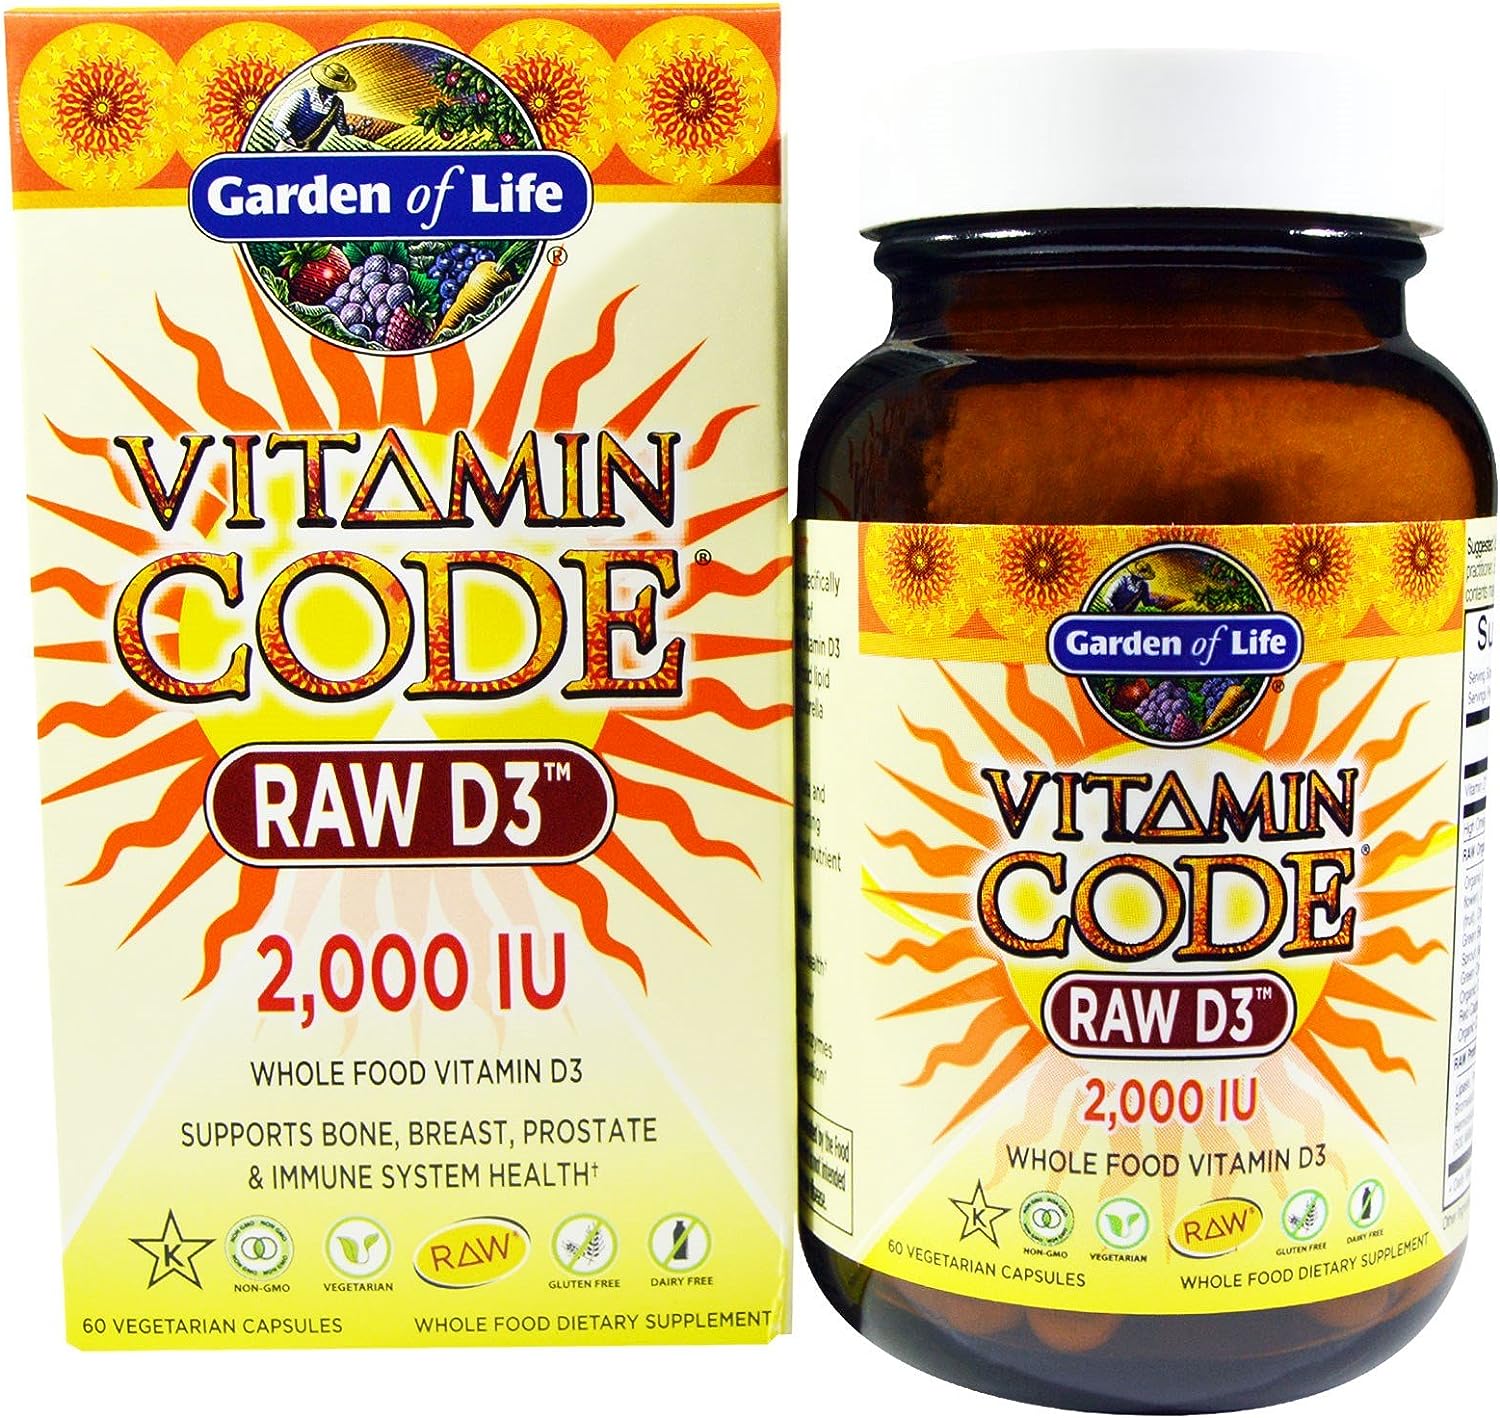 Garden of Life Vitamin Code Raw D3 Review